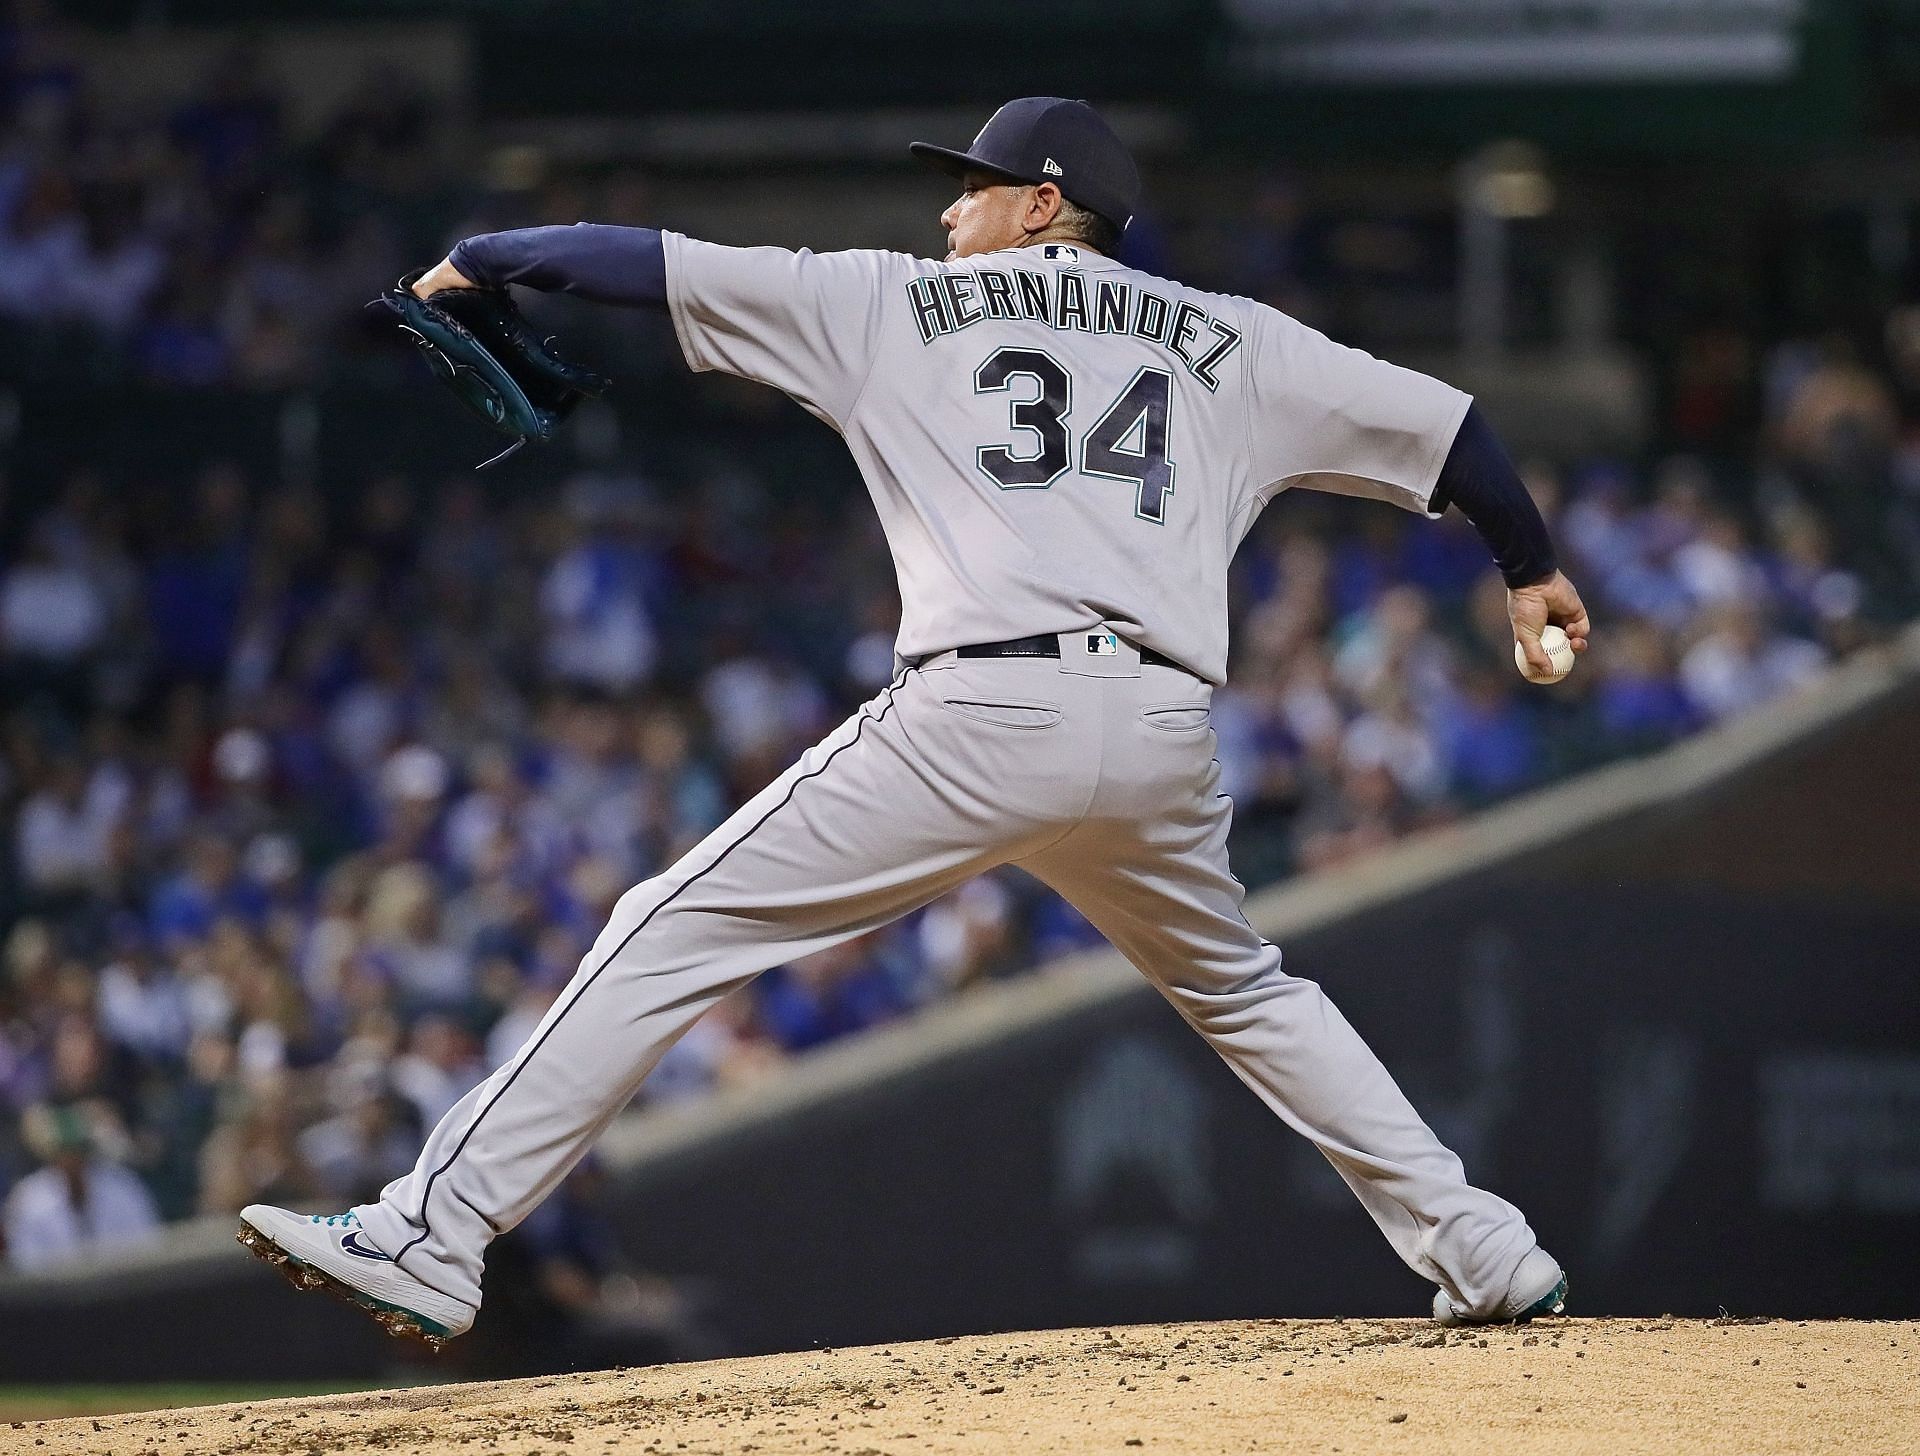 Fading fast: Sinking Indians beaten 9-2 as Felix Hernandez strikes out 10  for Mariners